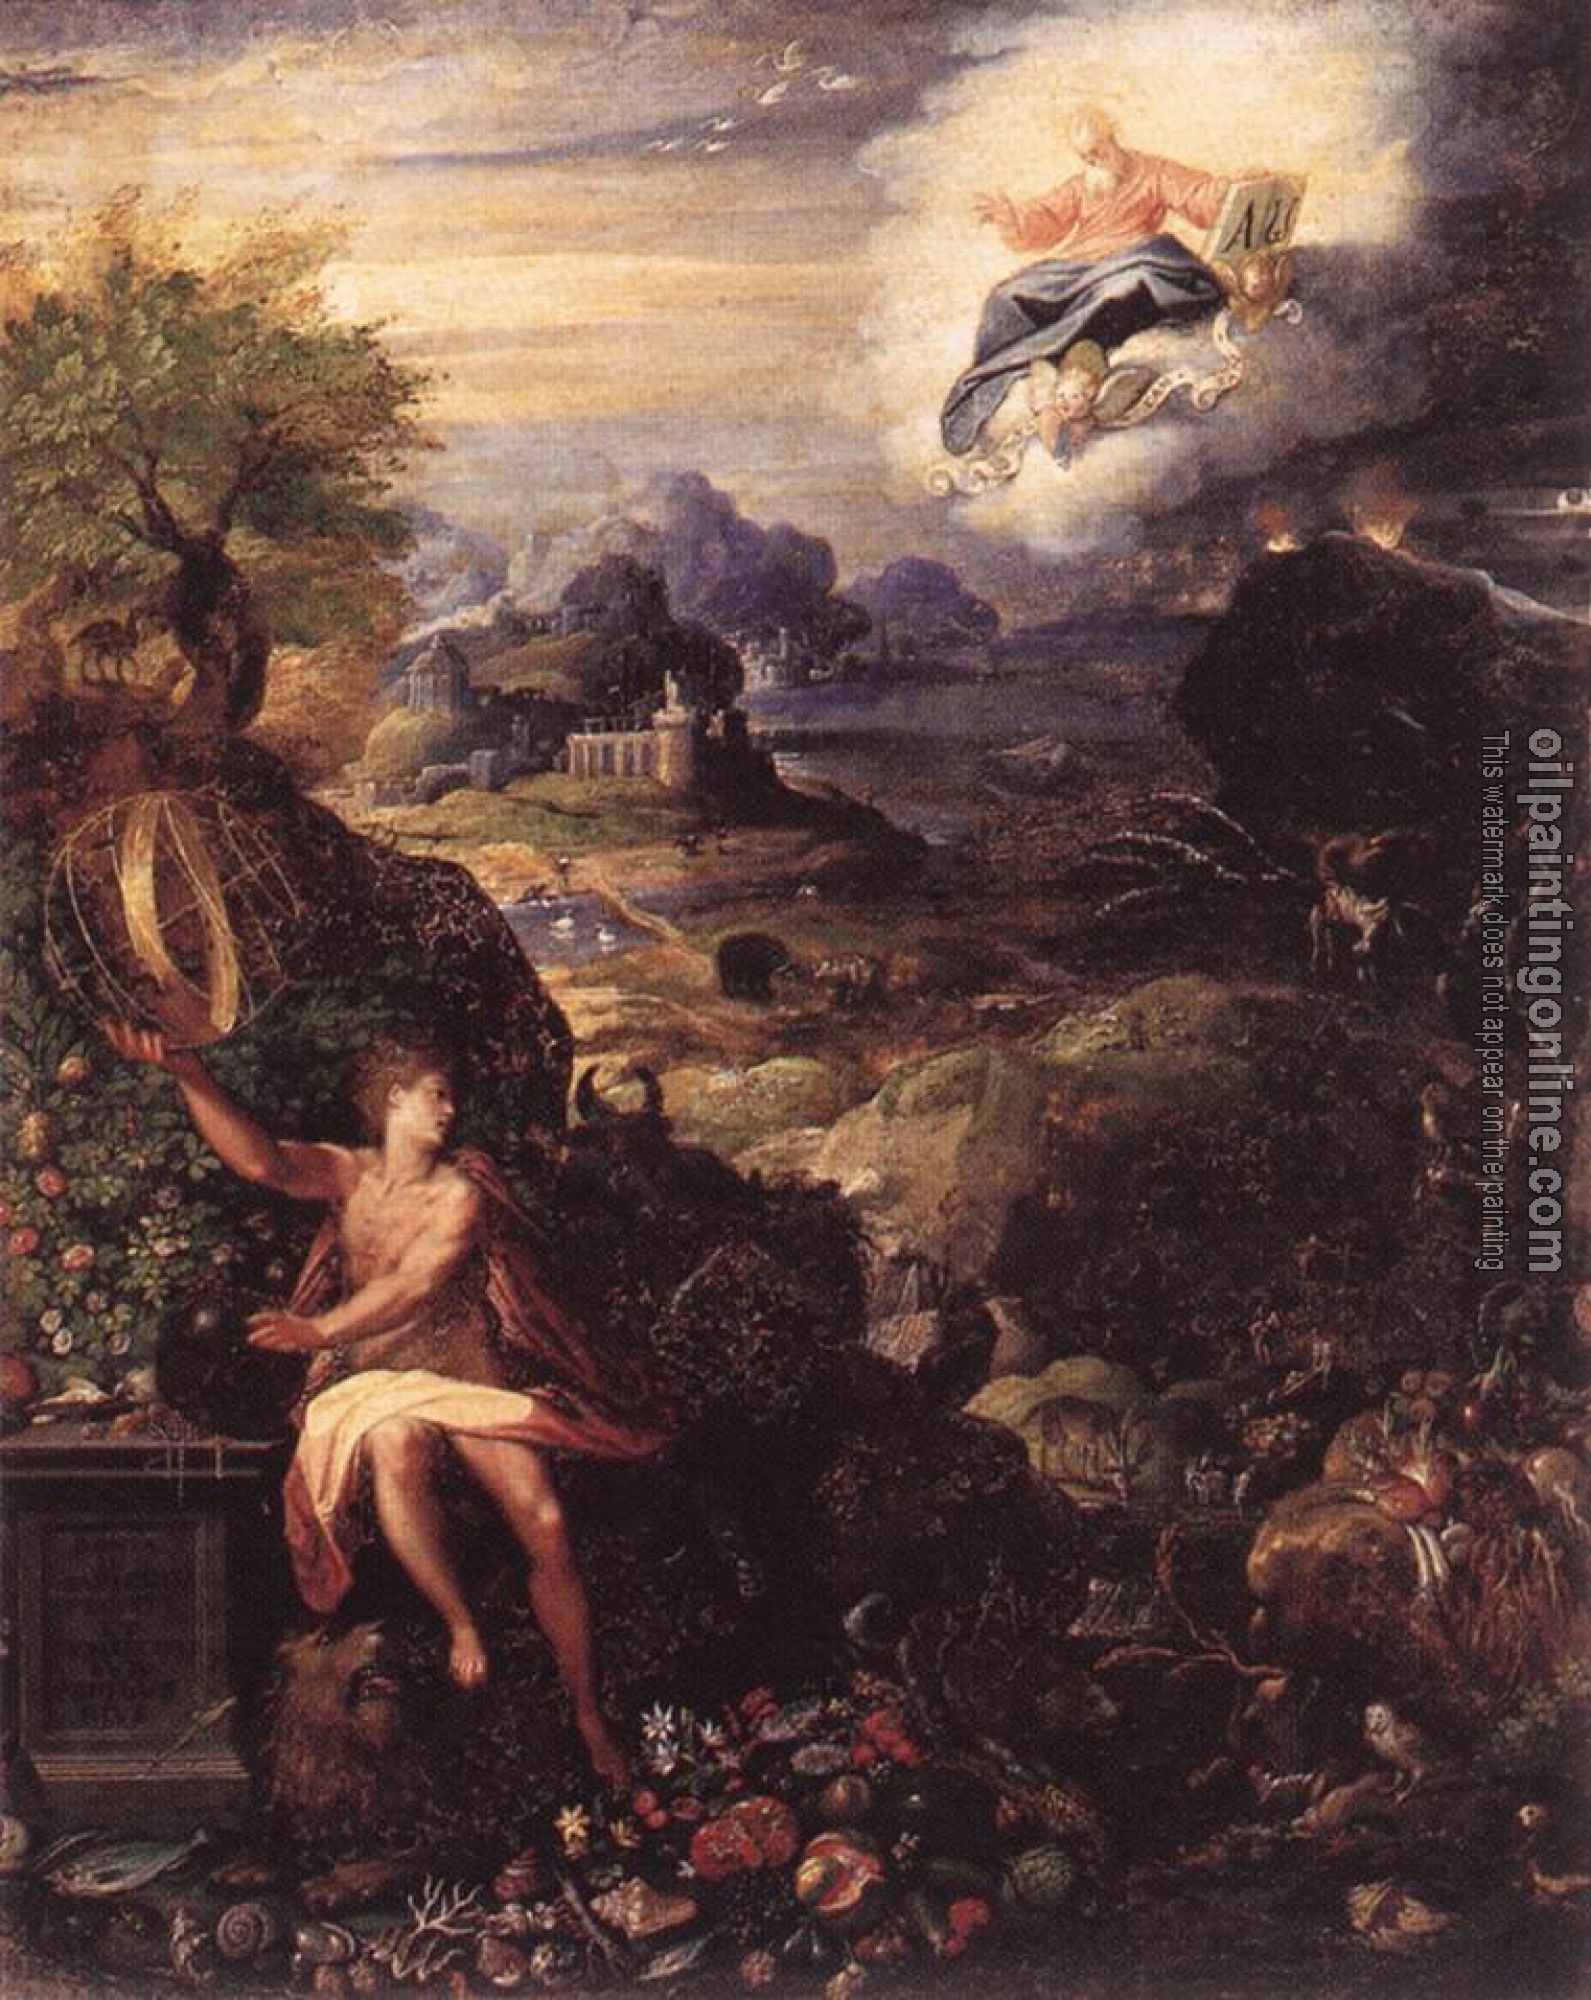 Zucchi, Jacopo - Allegory of the Creation